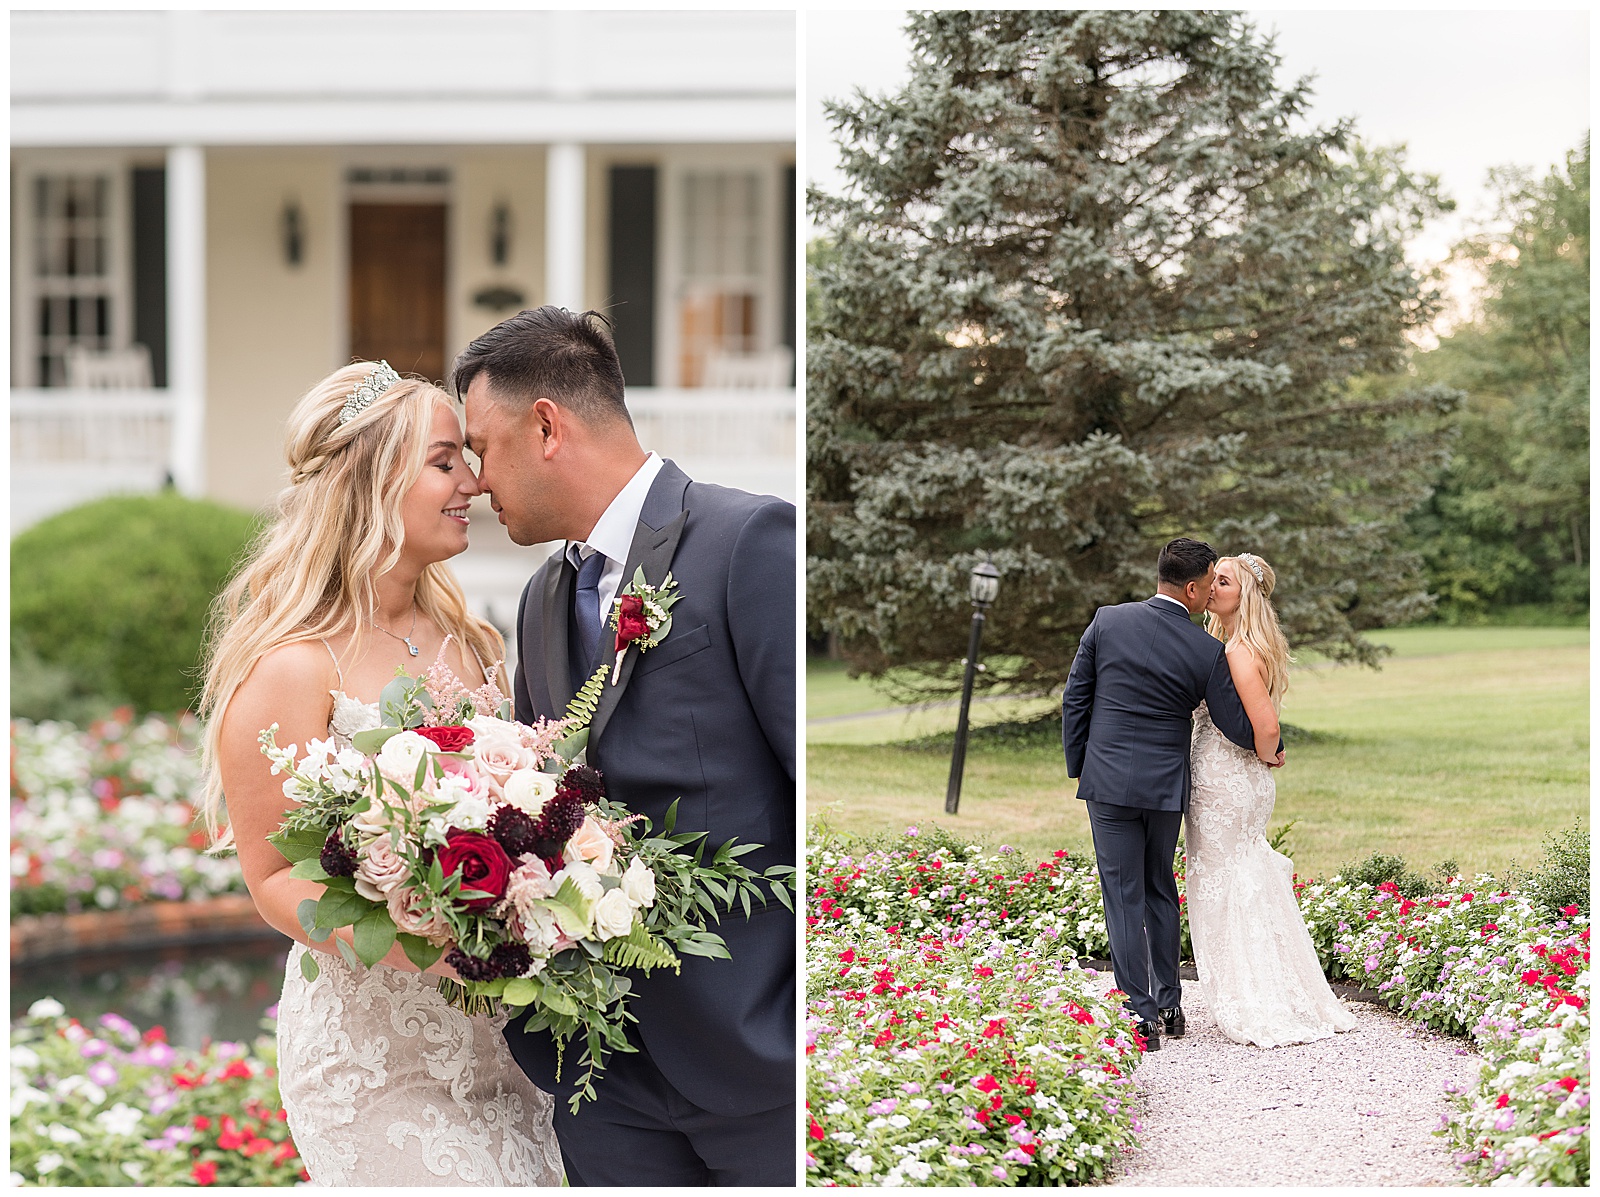 bride and groom stand close together and kiss by flower gardens near white home with black shutters